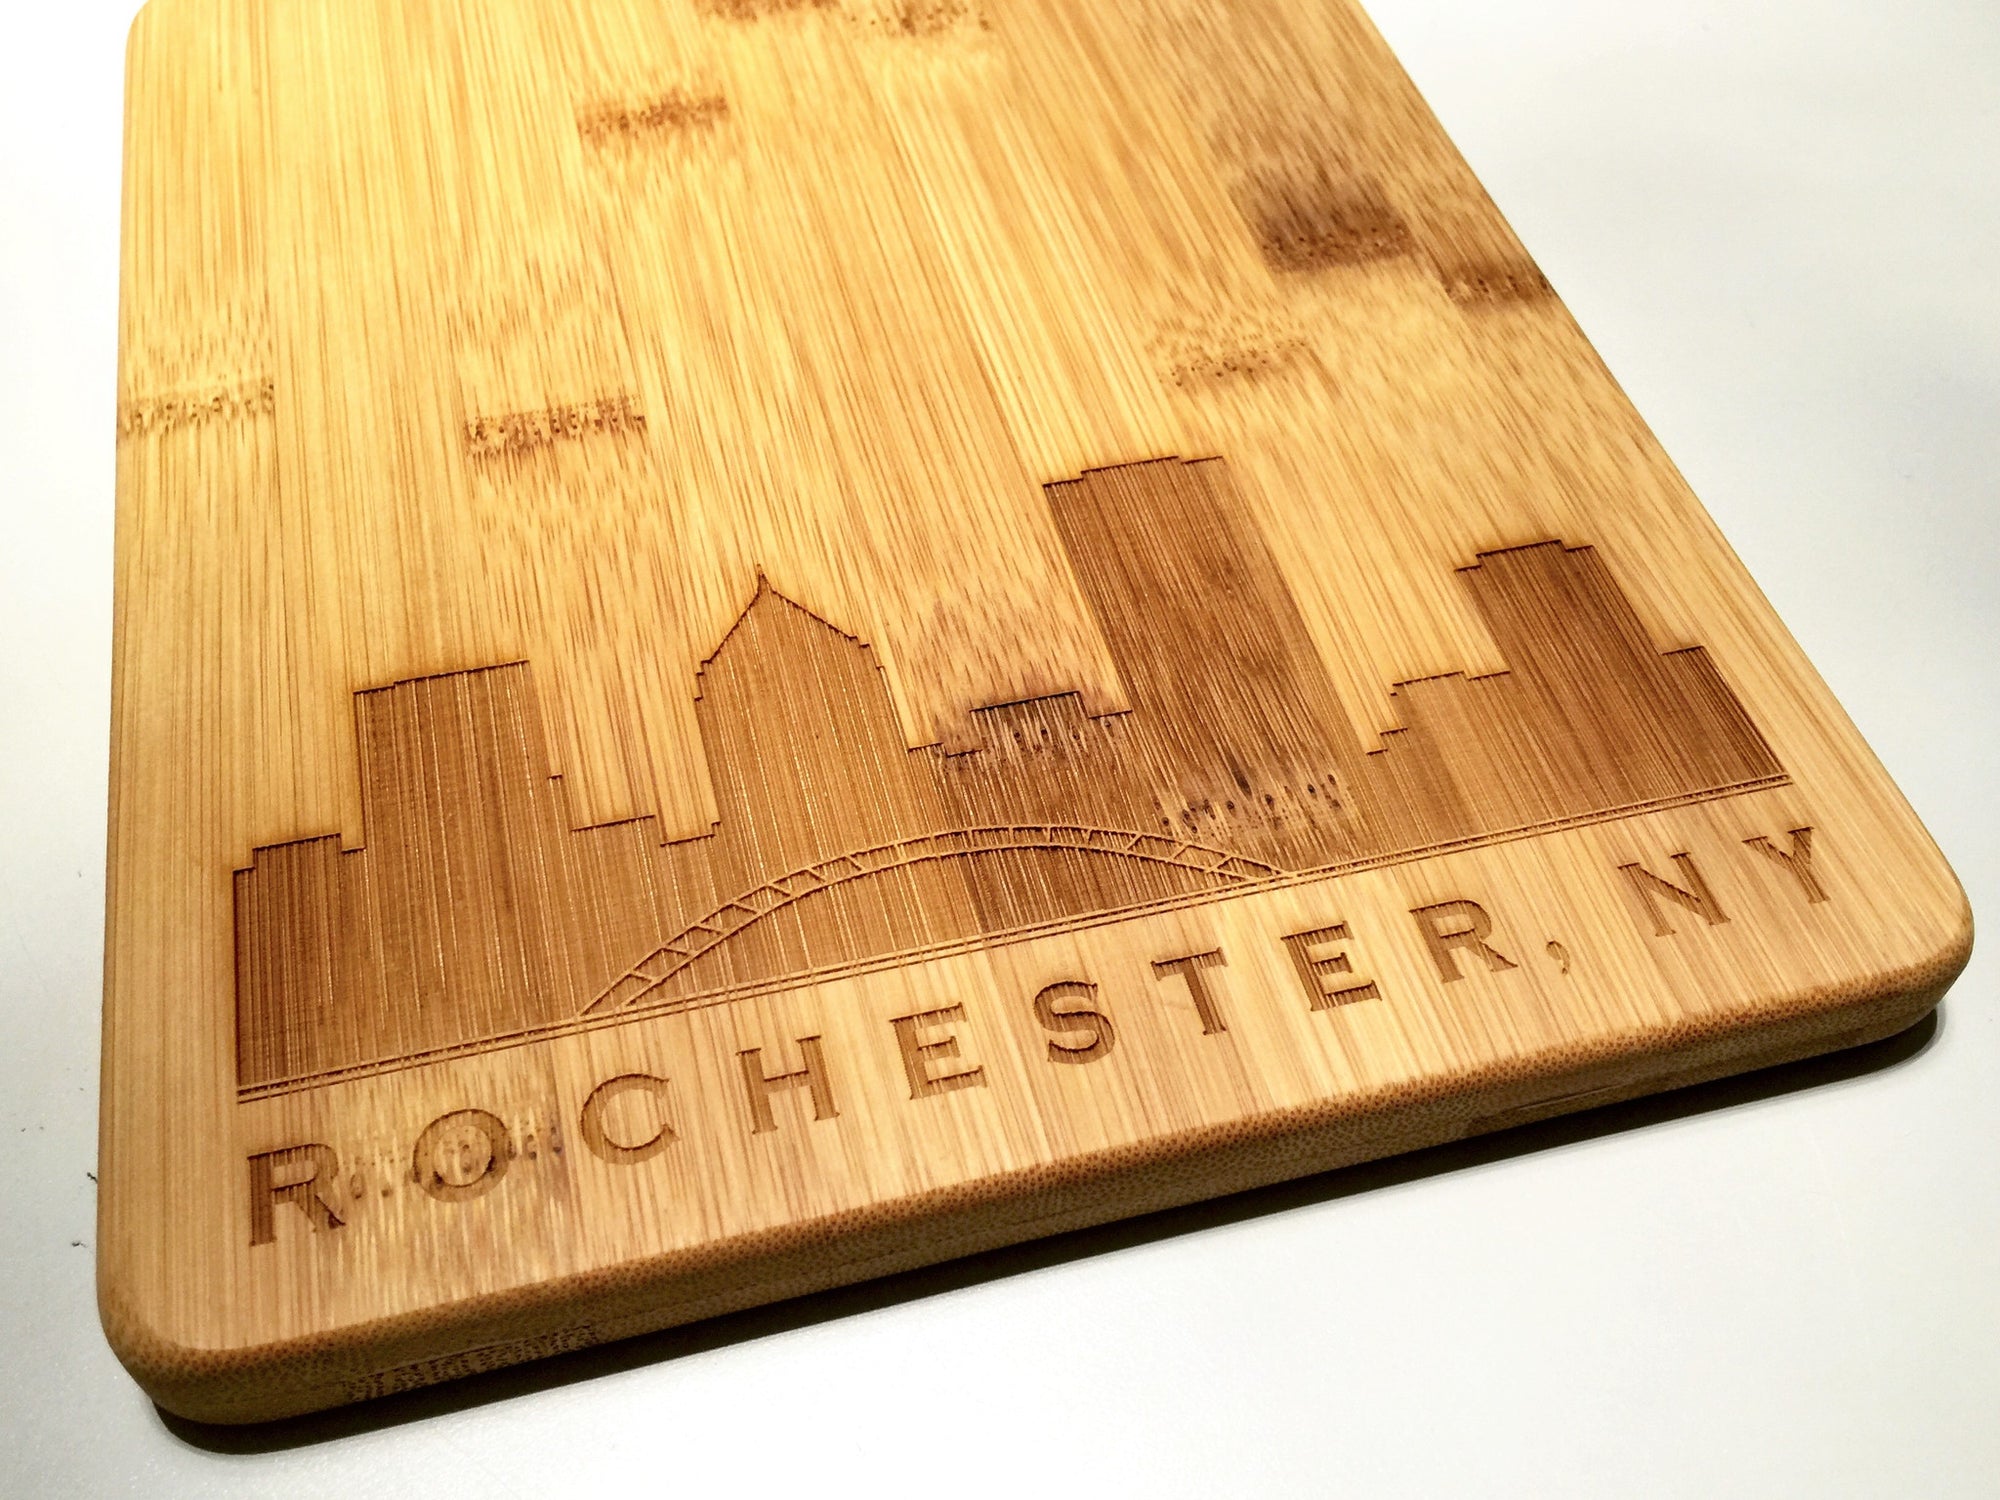 Rochester Bamboo Cutting Board - The BFLO Store